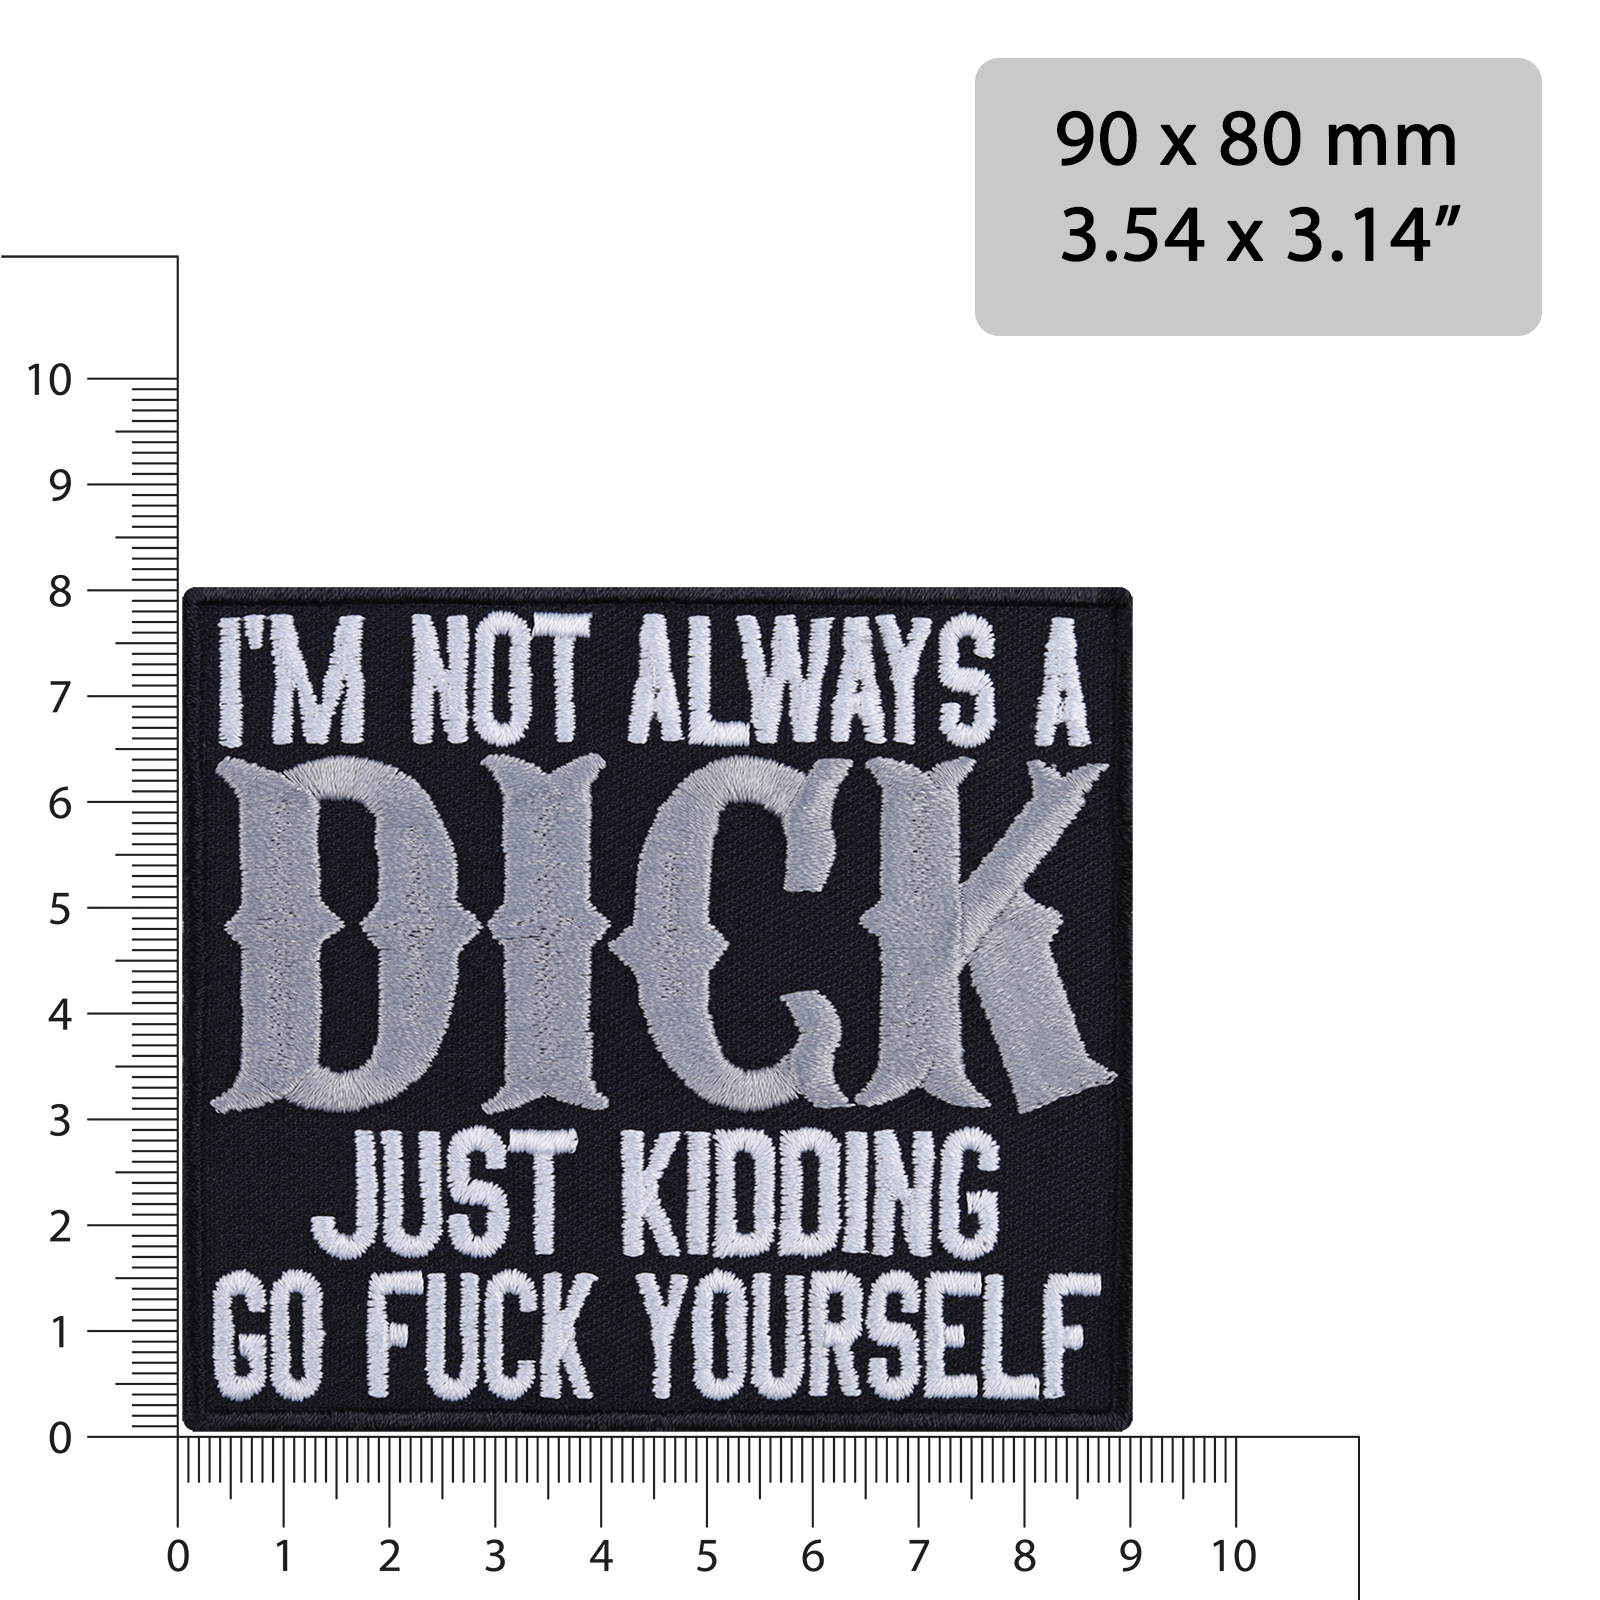 I'm not always a dick (Just kidding go fuck yourselfe) - Patch